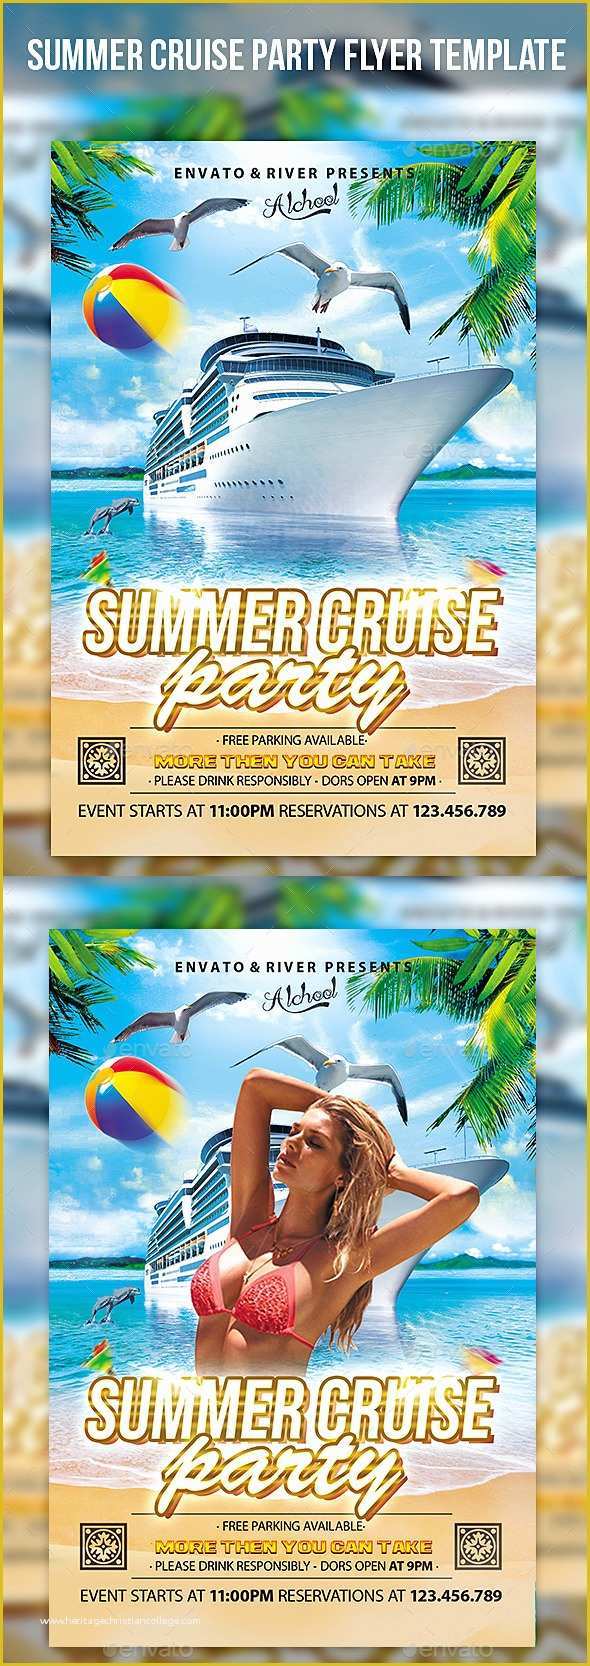 Cruise Flyer Template Free Of Summer Cruise Party Flyer Template by Cerceicer